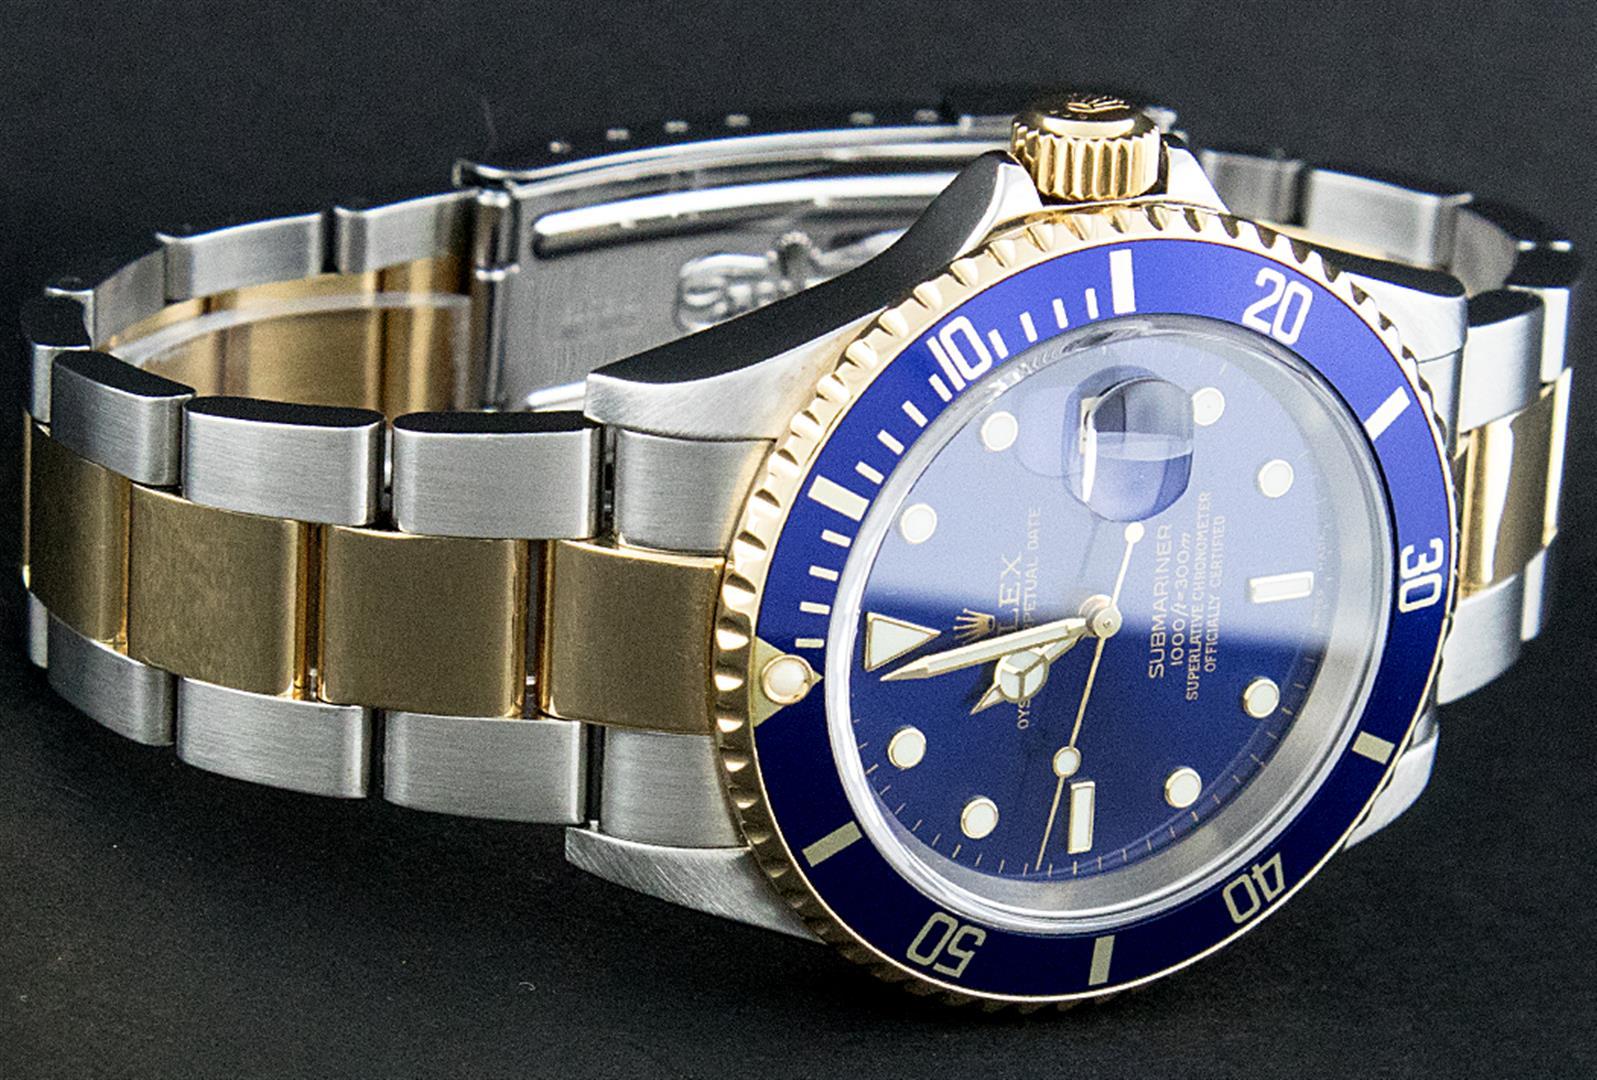 Rolex Mens 18K Yellow Gold And Stainless Steel Blue Submariner 40MM